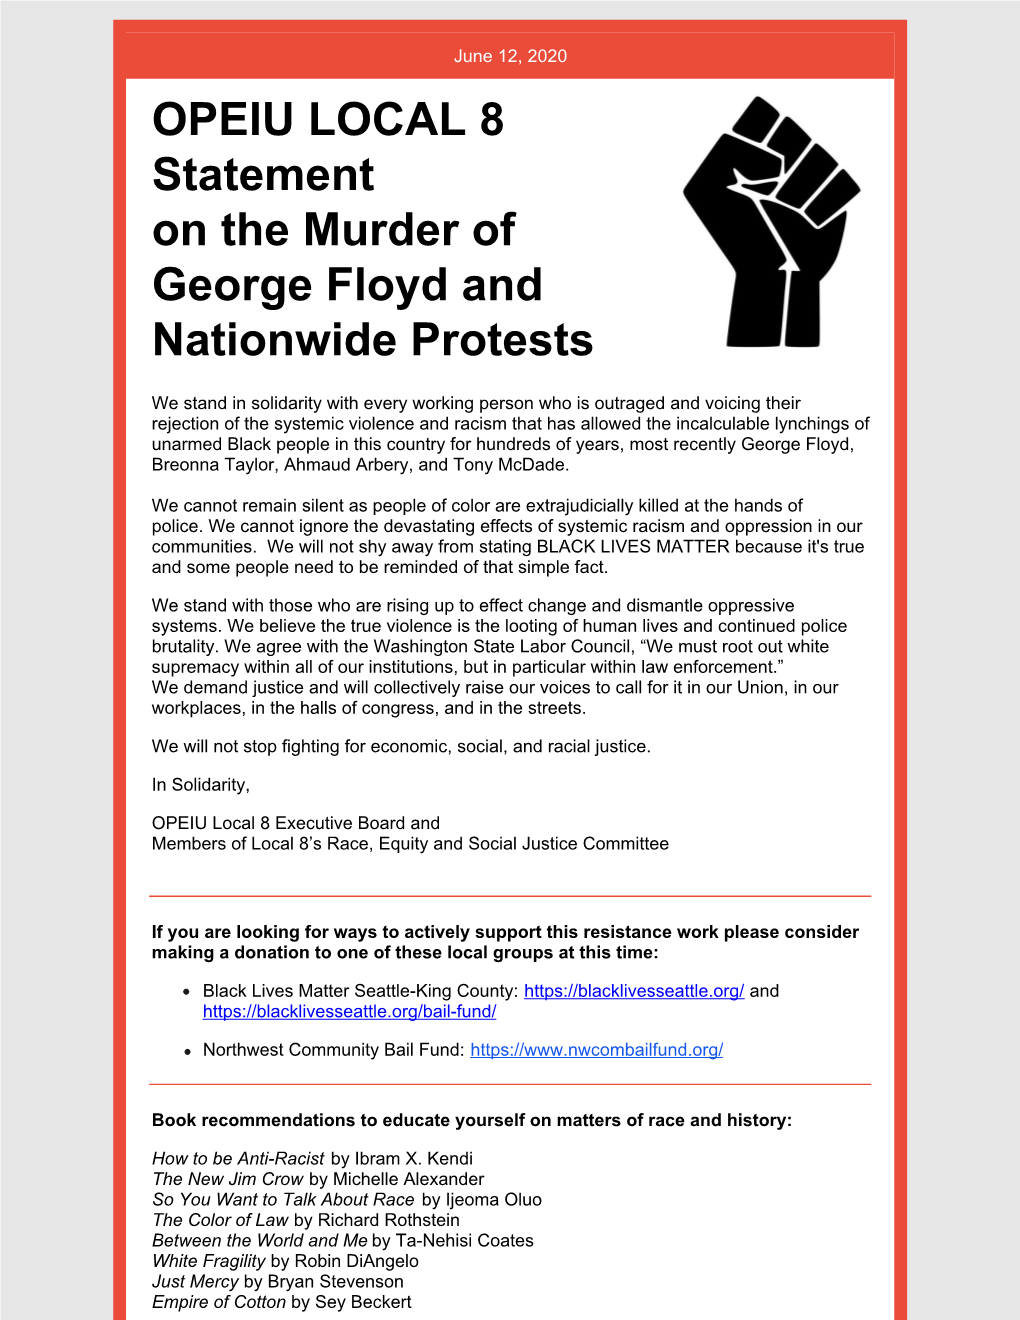 OPEIU LOCAL 8 Statement on the Murder of George Floyd and Nationwide Protests